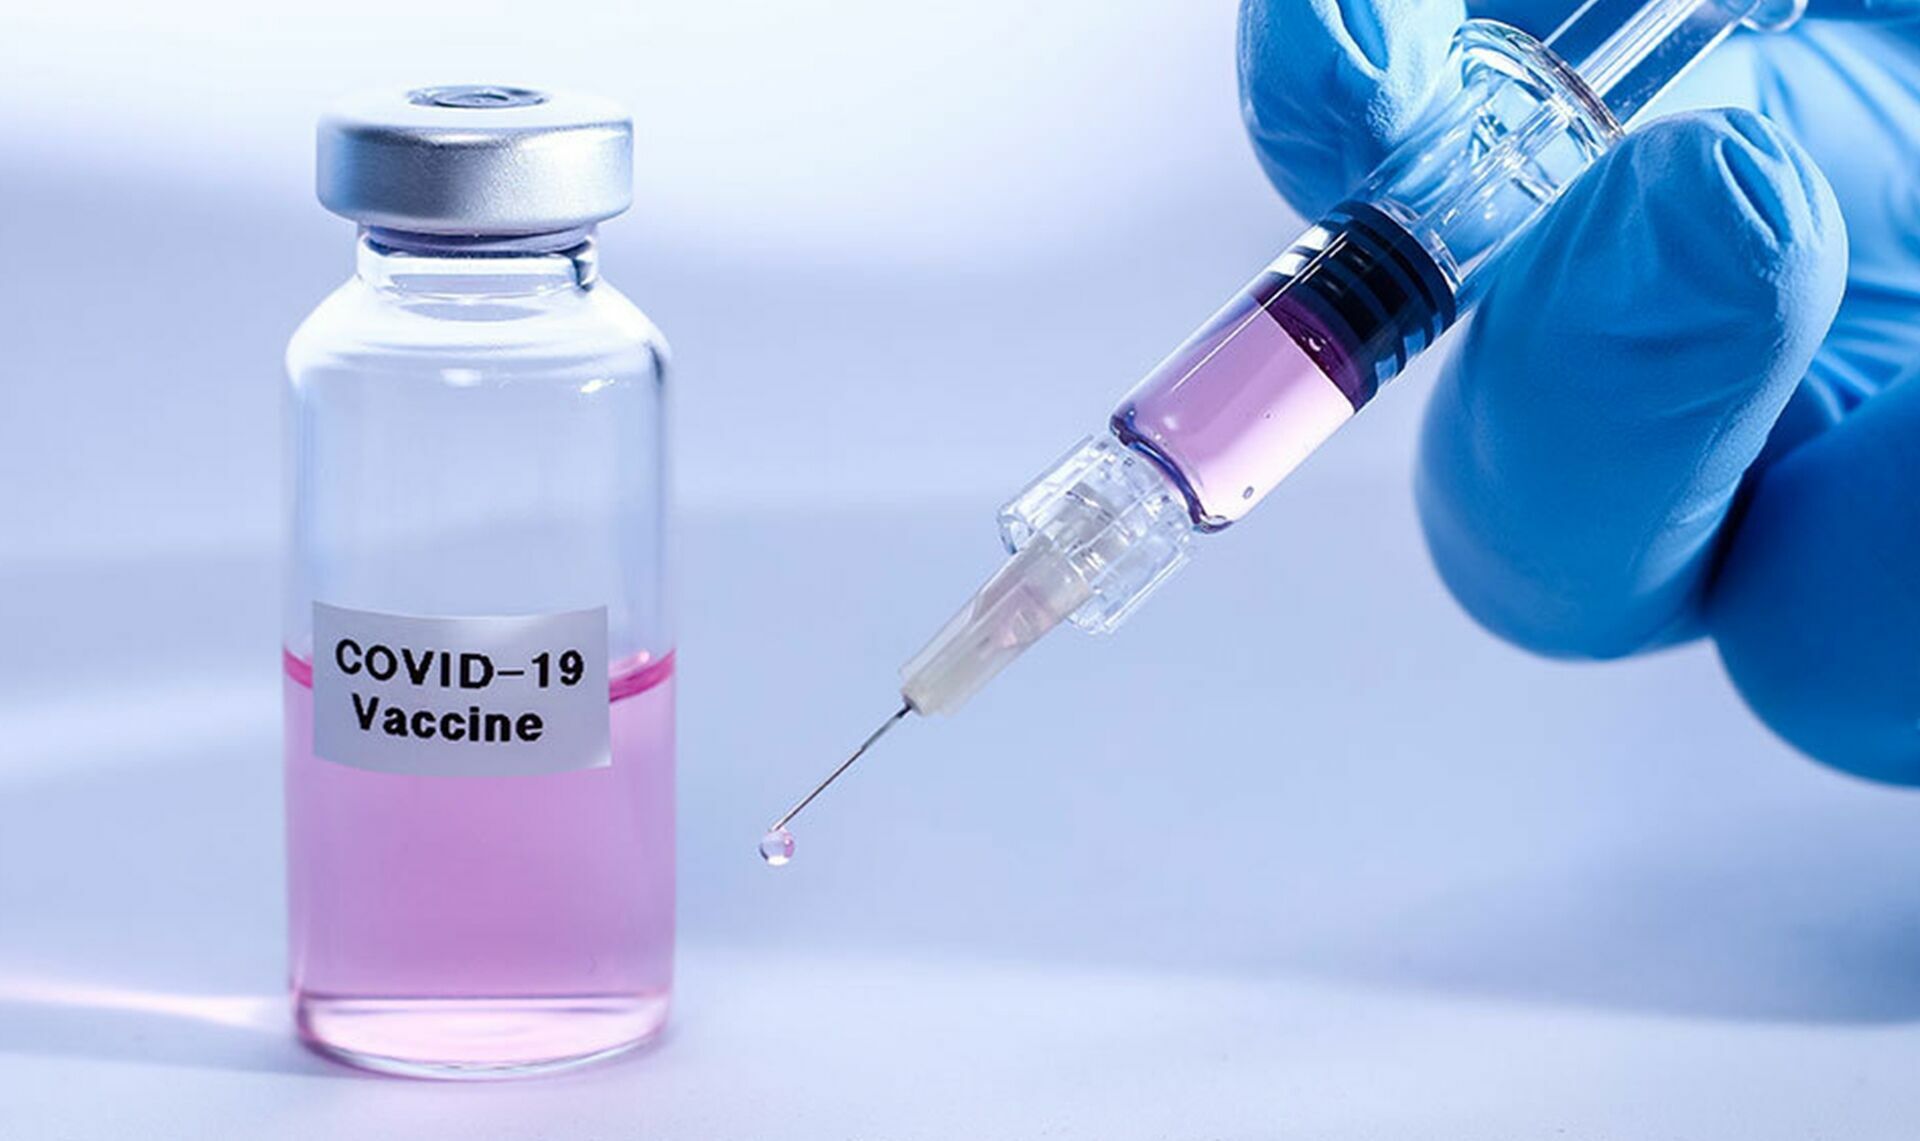 Is "Sputnik" vaccine our answer to coronavirus or is it the Russian roulette?